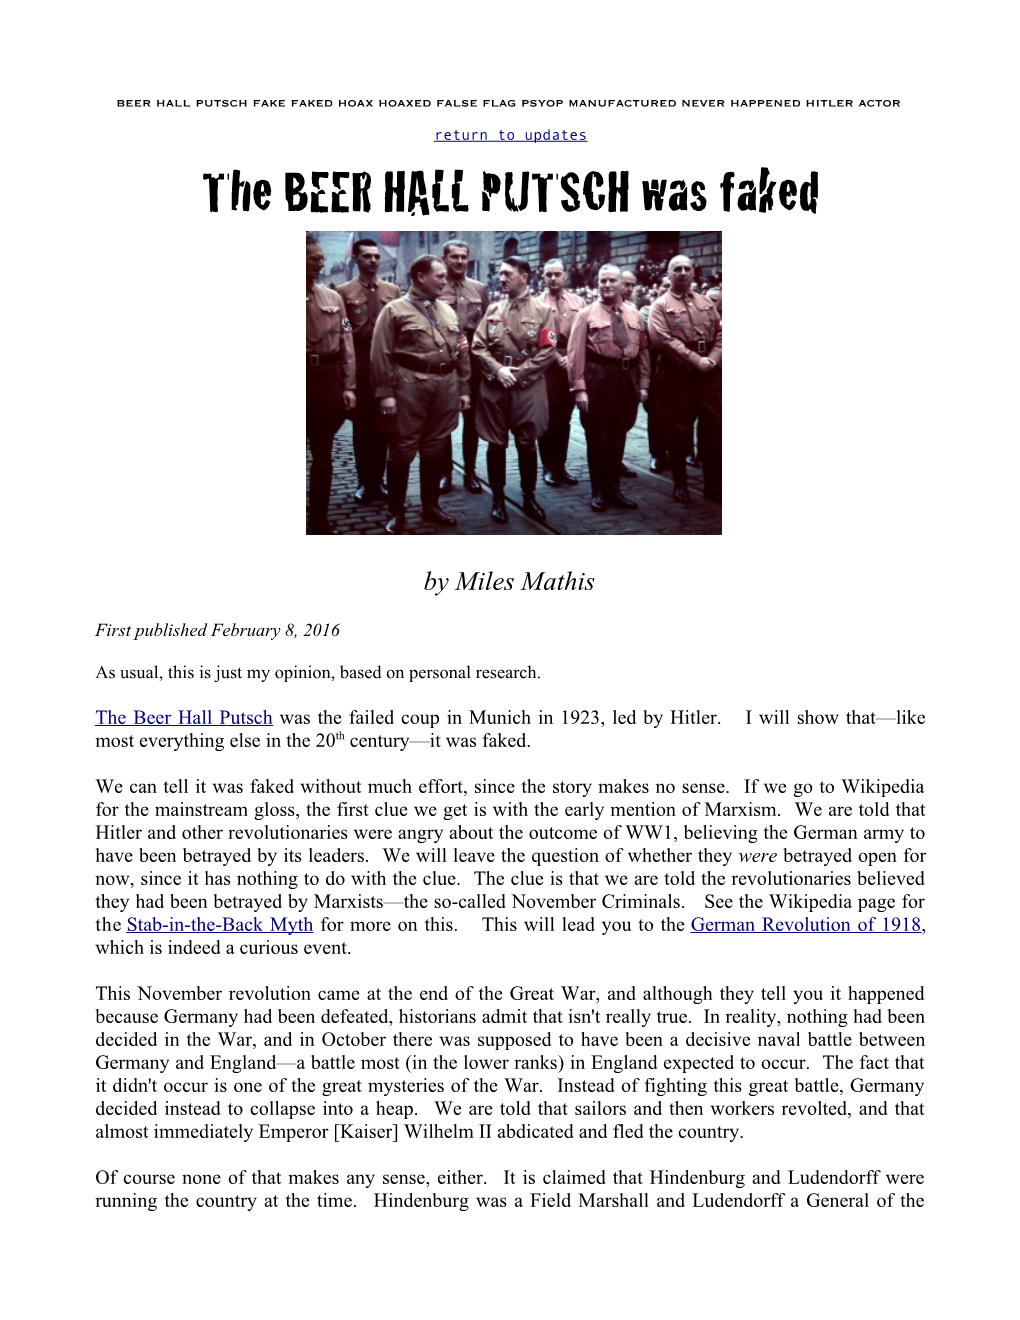 The BEER HALL PUTSCH Was Faked